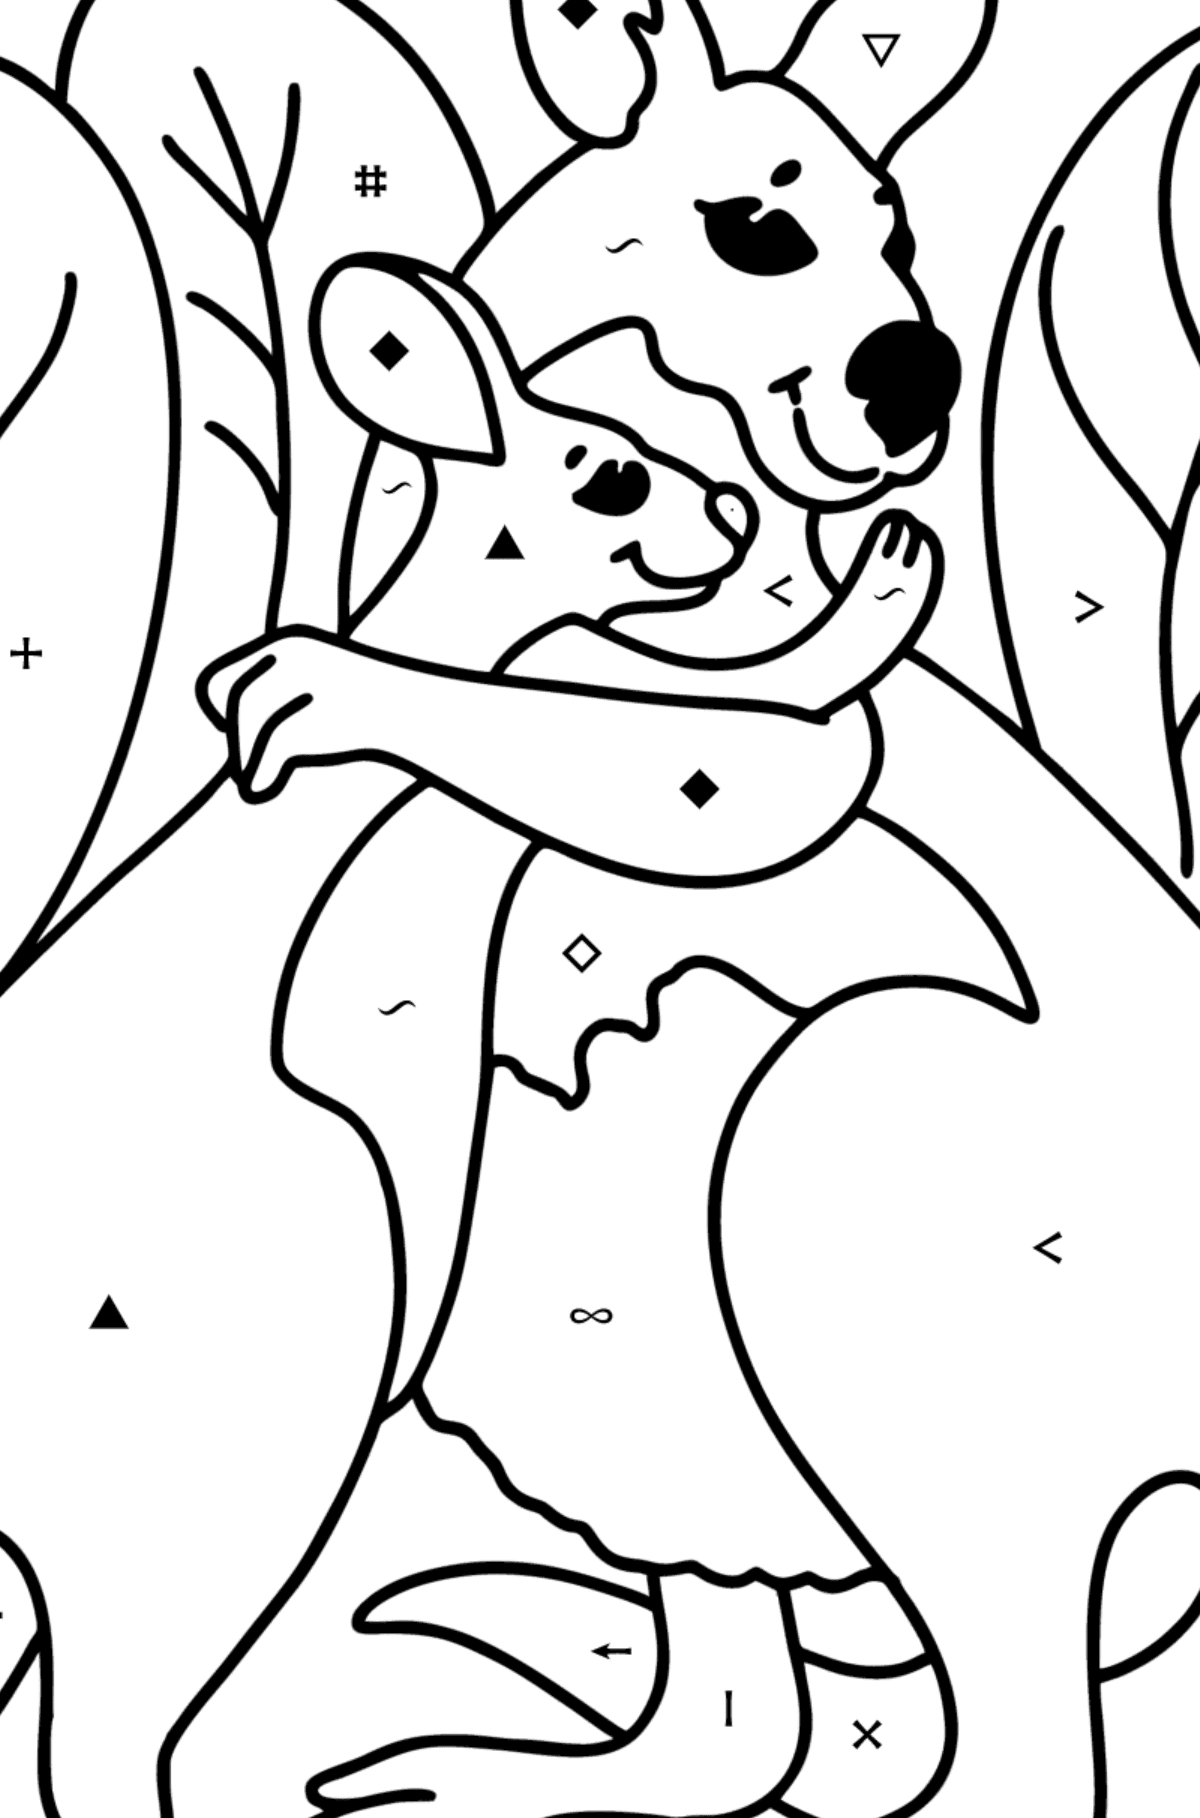 Coloring page - cute kangaroo - Coloring by Symbols for Kids